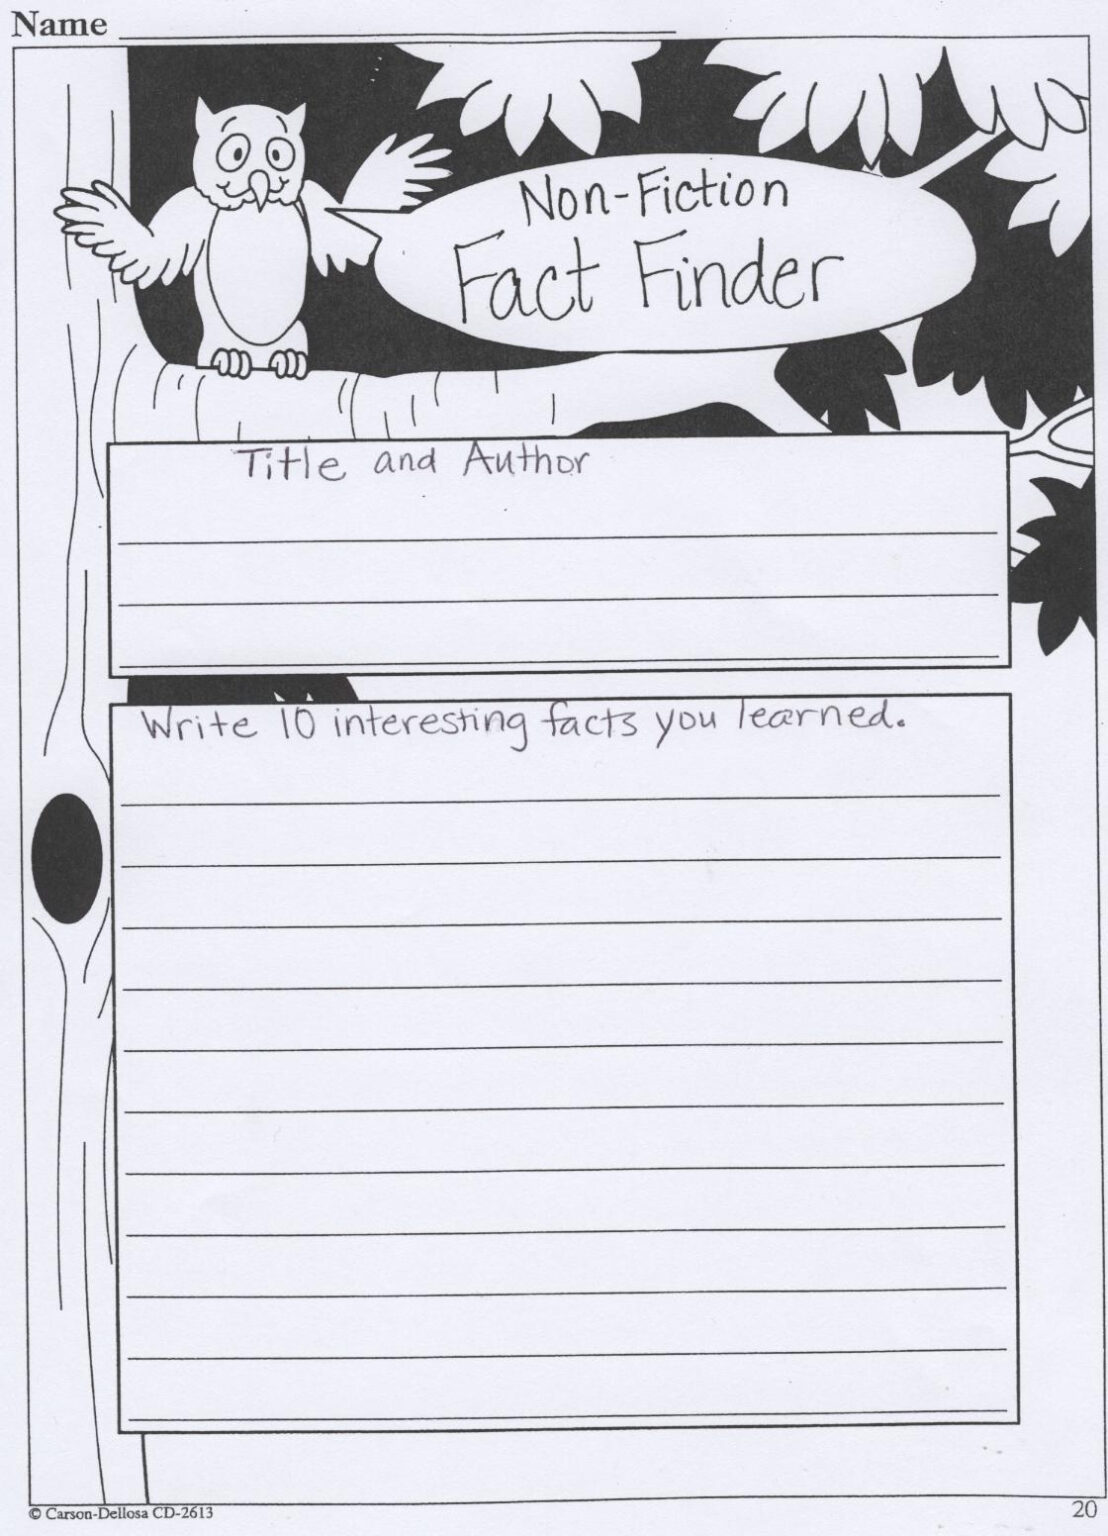 ms-hill-s-fifth-grade-non-fiction-book-report-forms-throughout